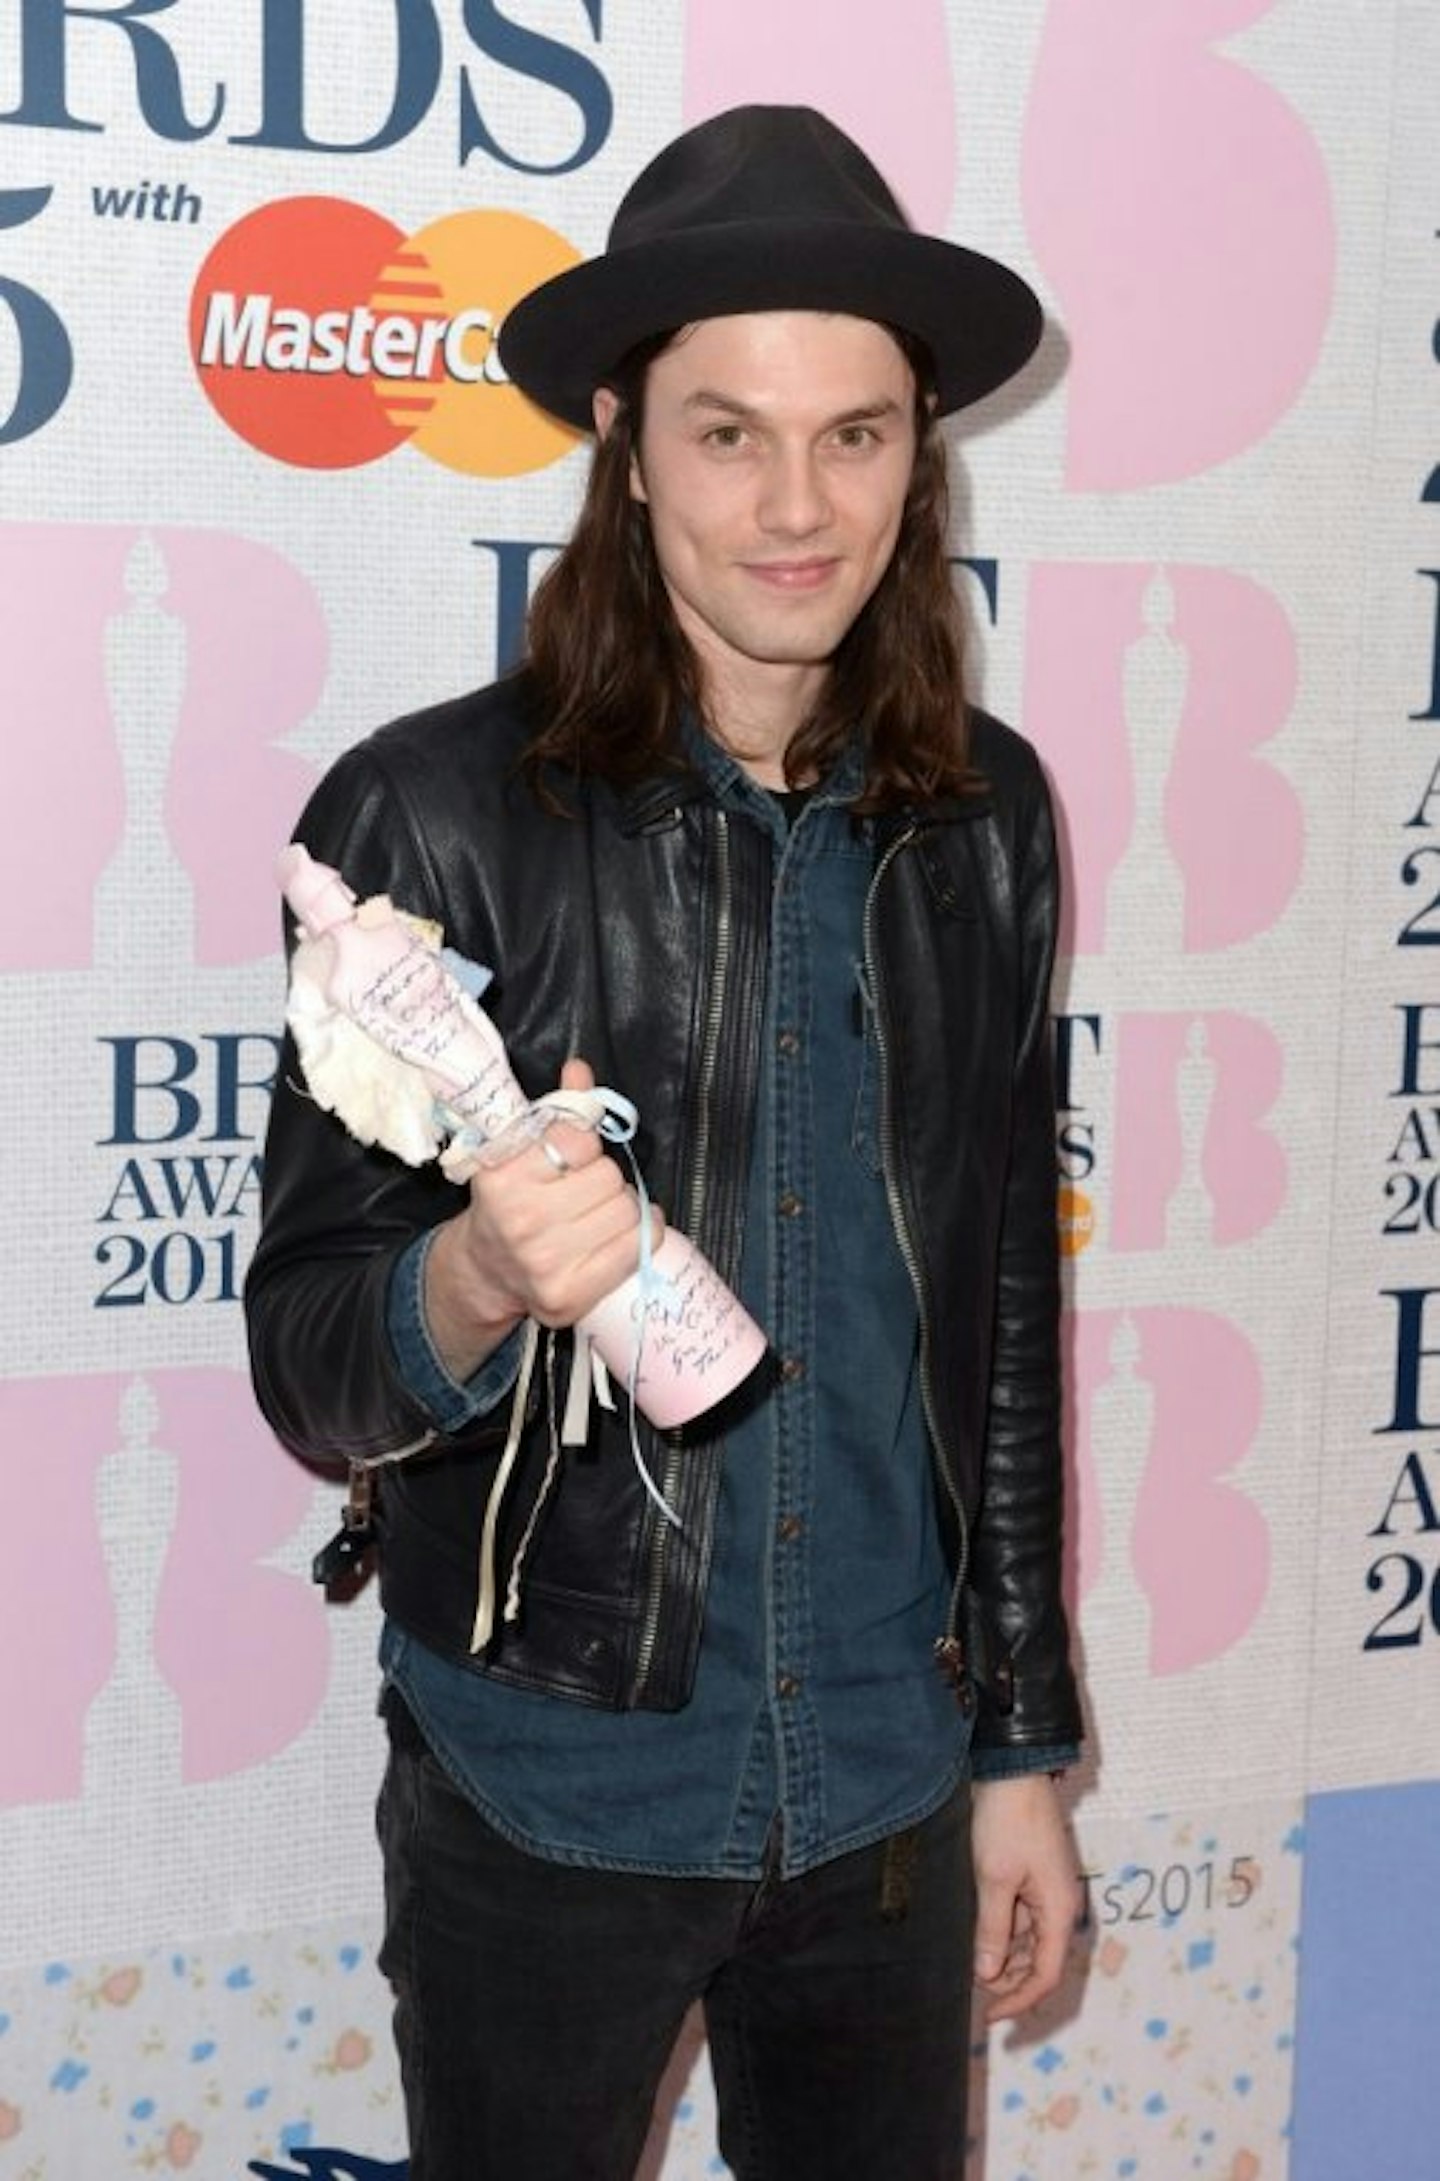 James Bay wearing a hat and holding BRIT Award